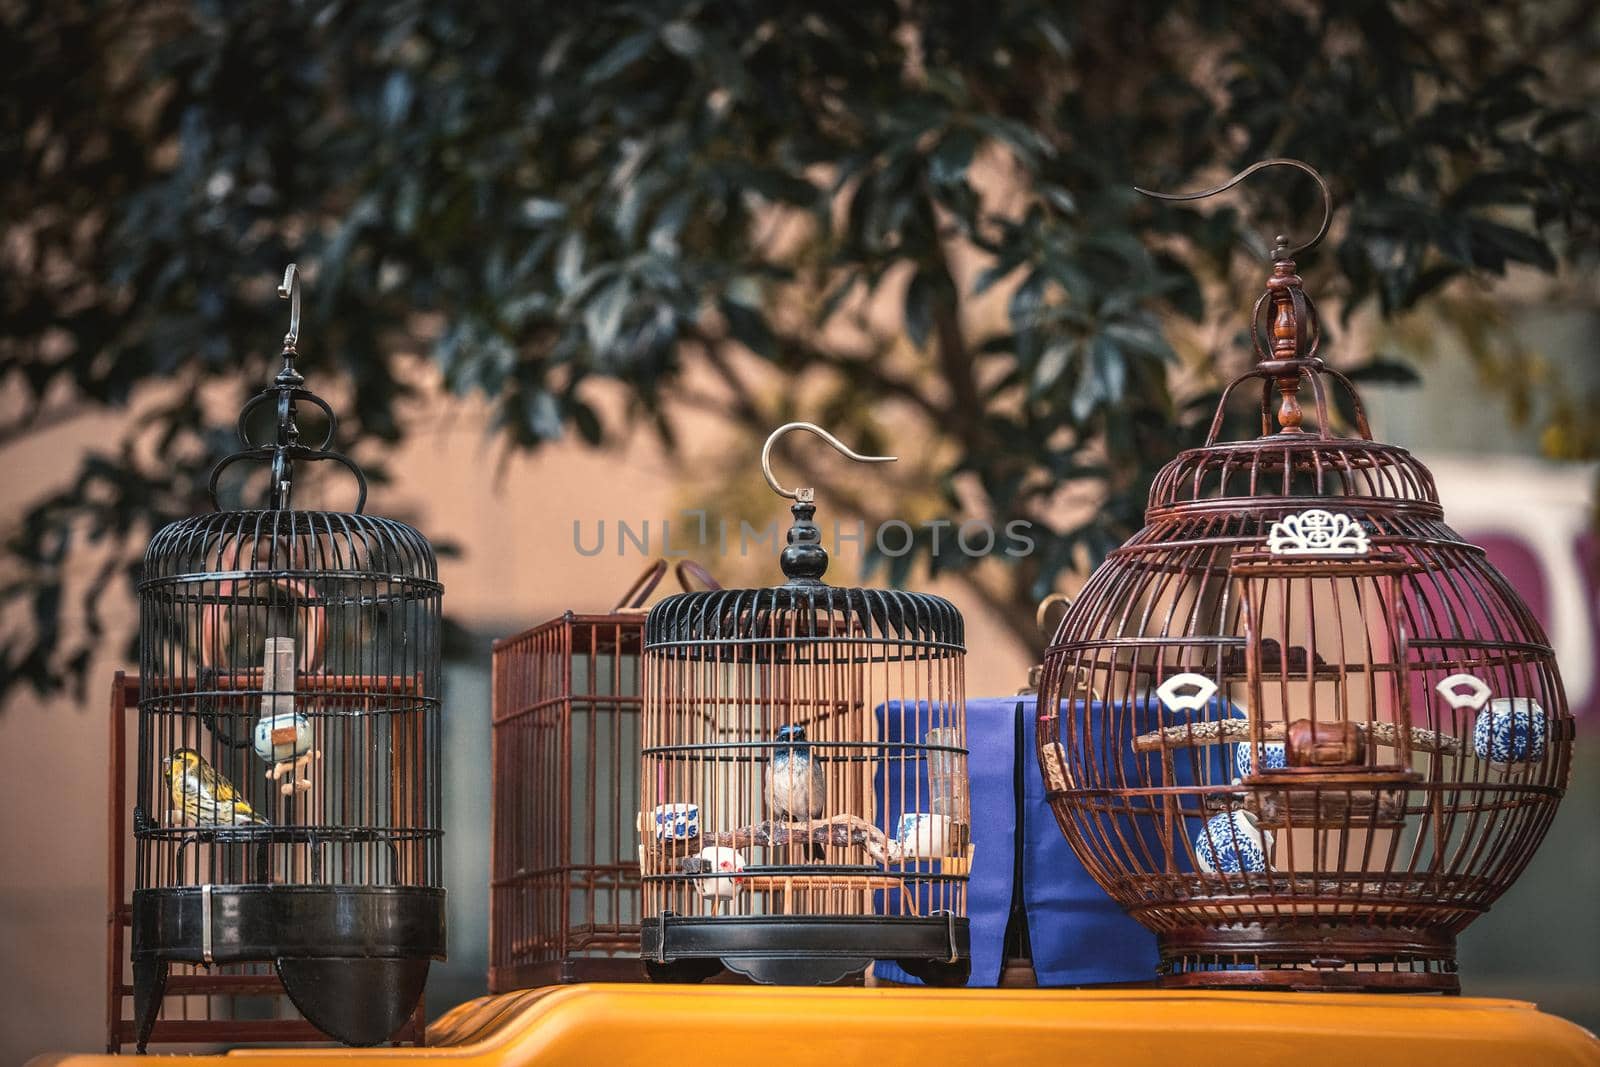 Birds in cages hanging at the street market in Hangzhou, China